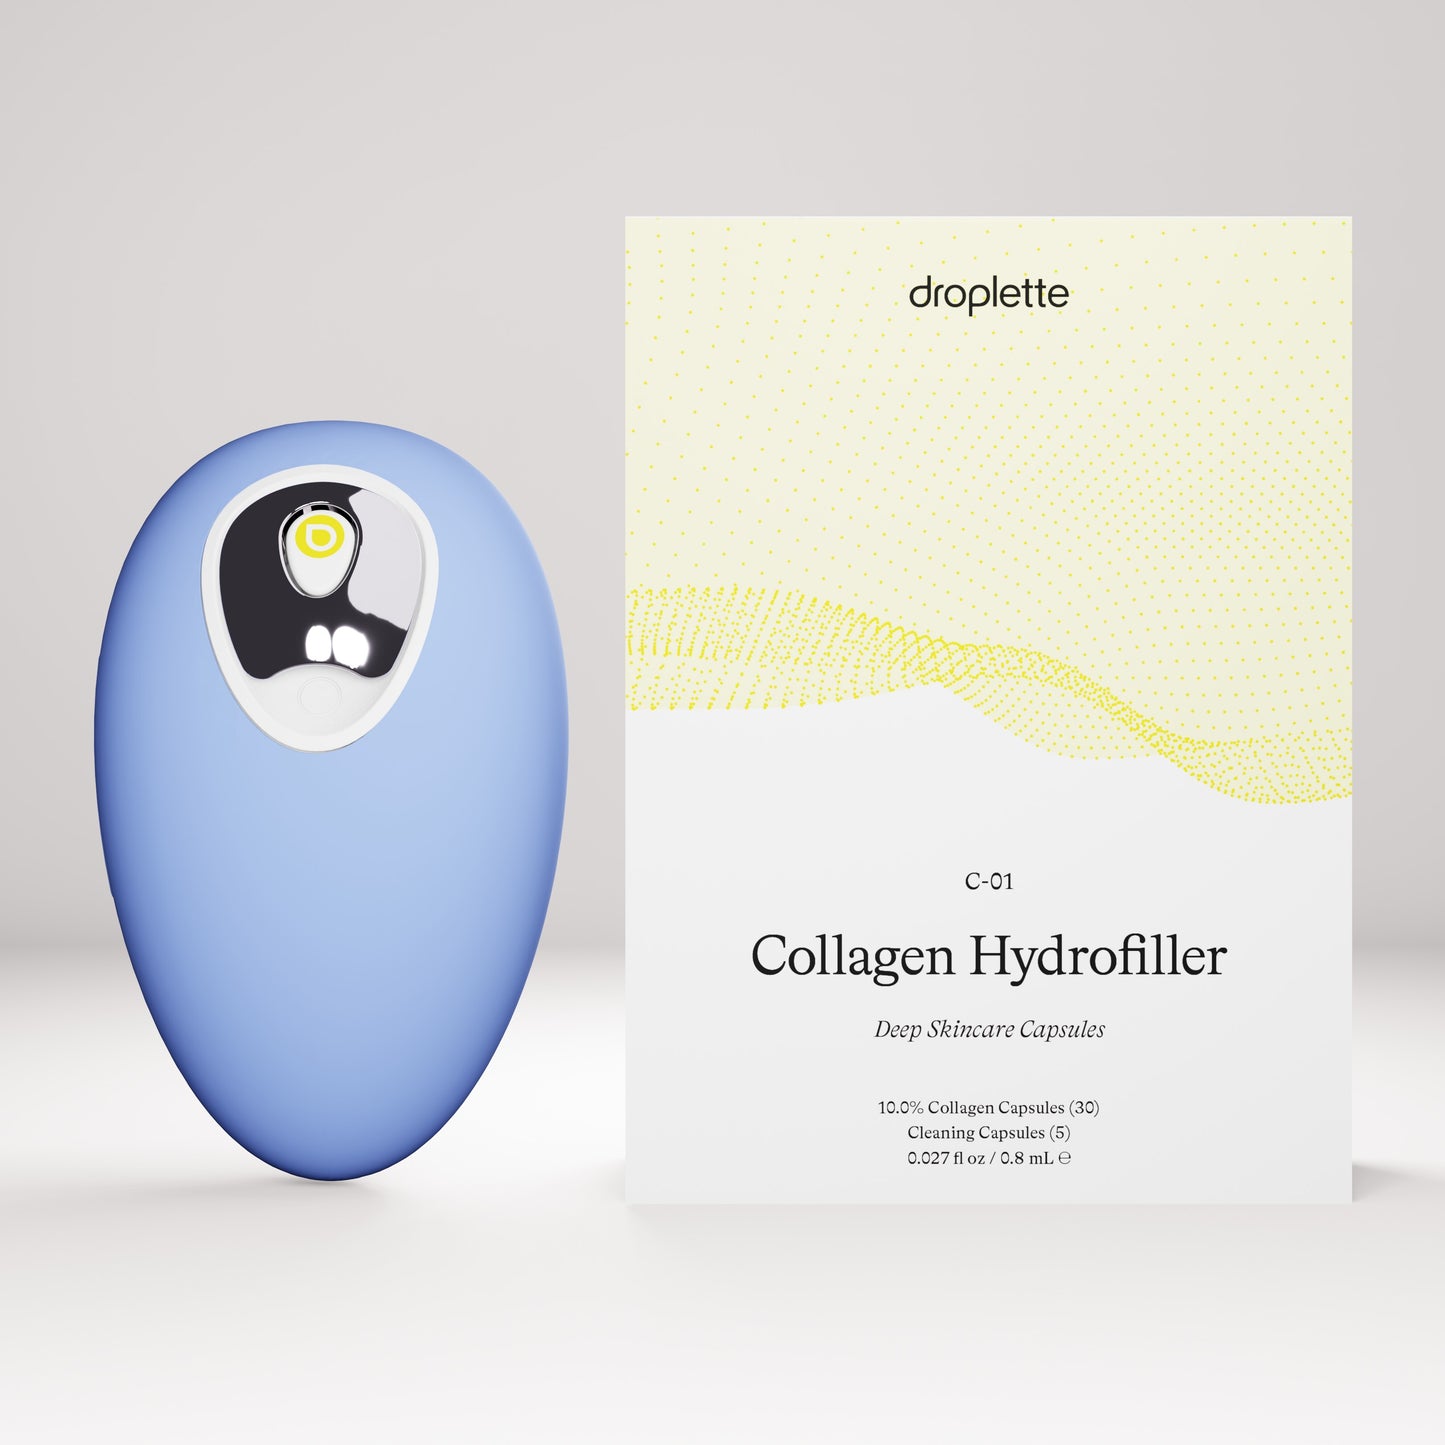 Classic Iris Droplette Device sits beside a 30 capsule sized box of Droplette's Collagen Hydrofiller capsules